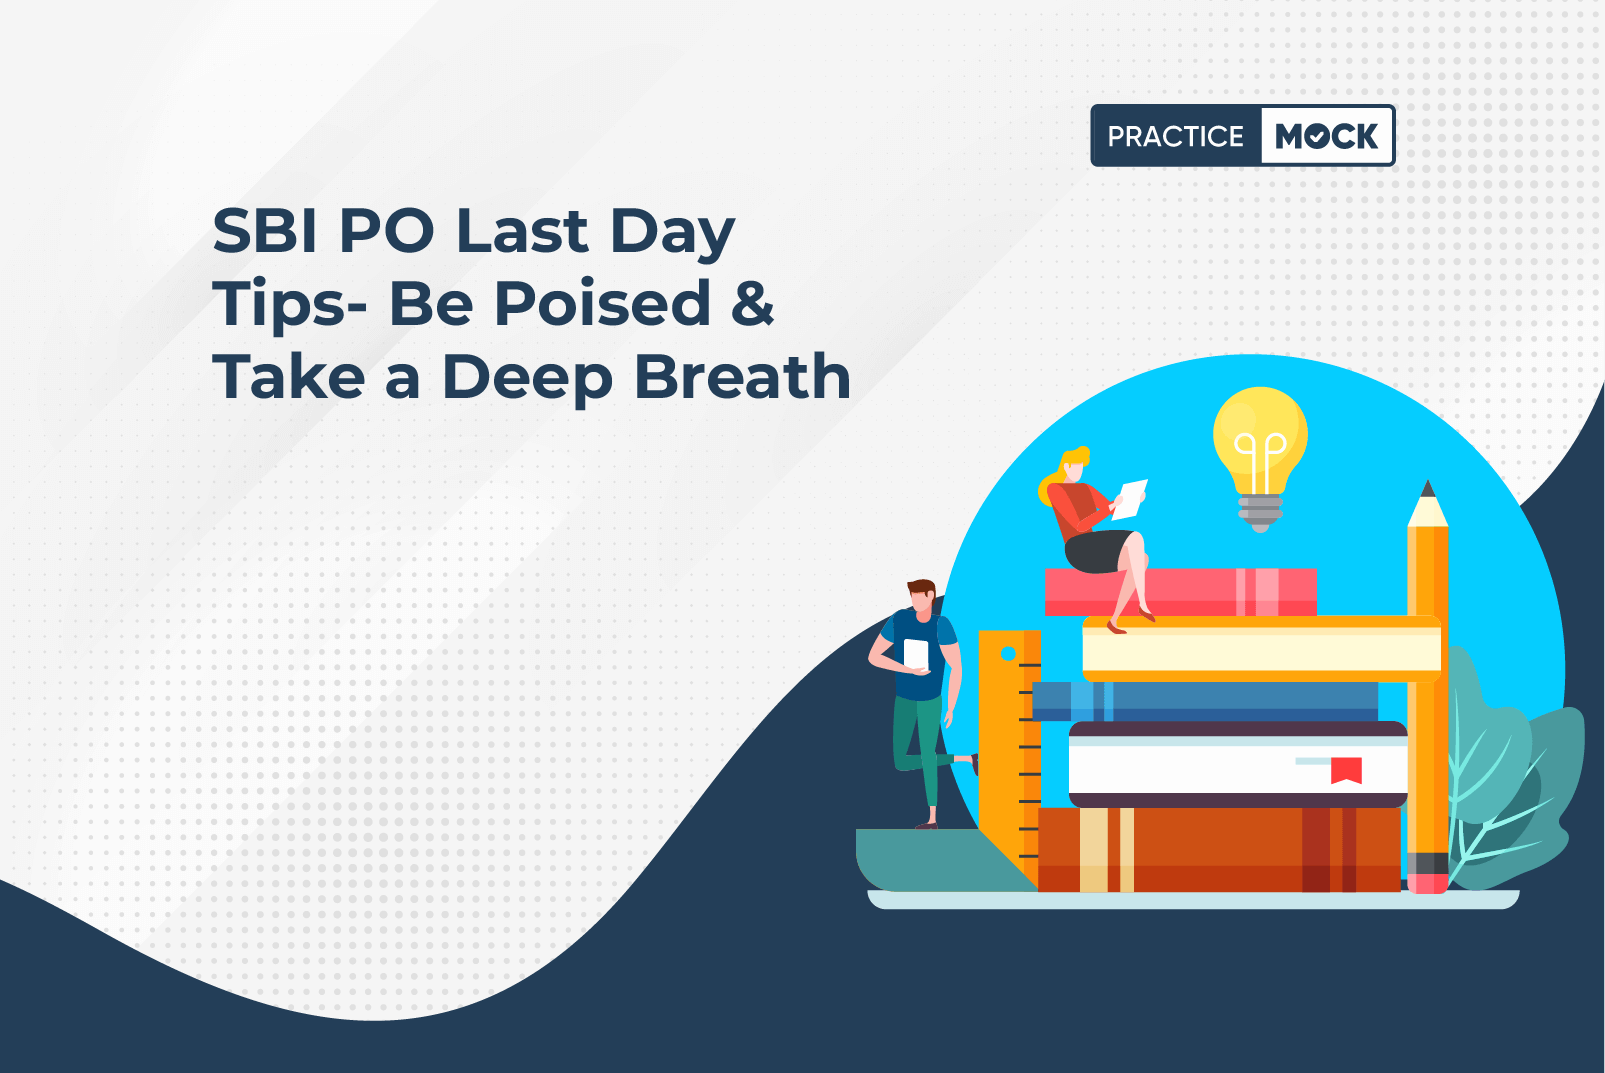 SBI PO Last Day Tips- Be Poised & Take a Deep Breath (1)